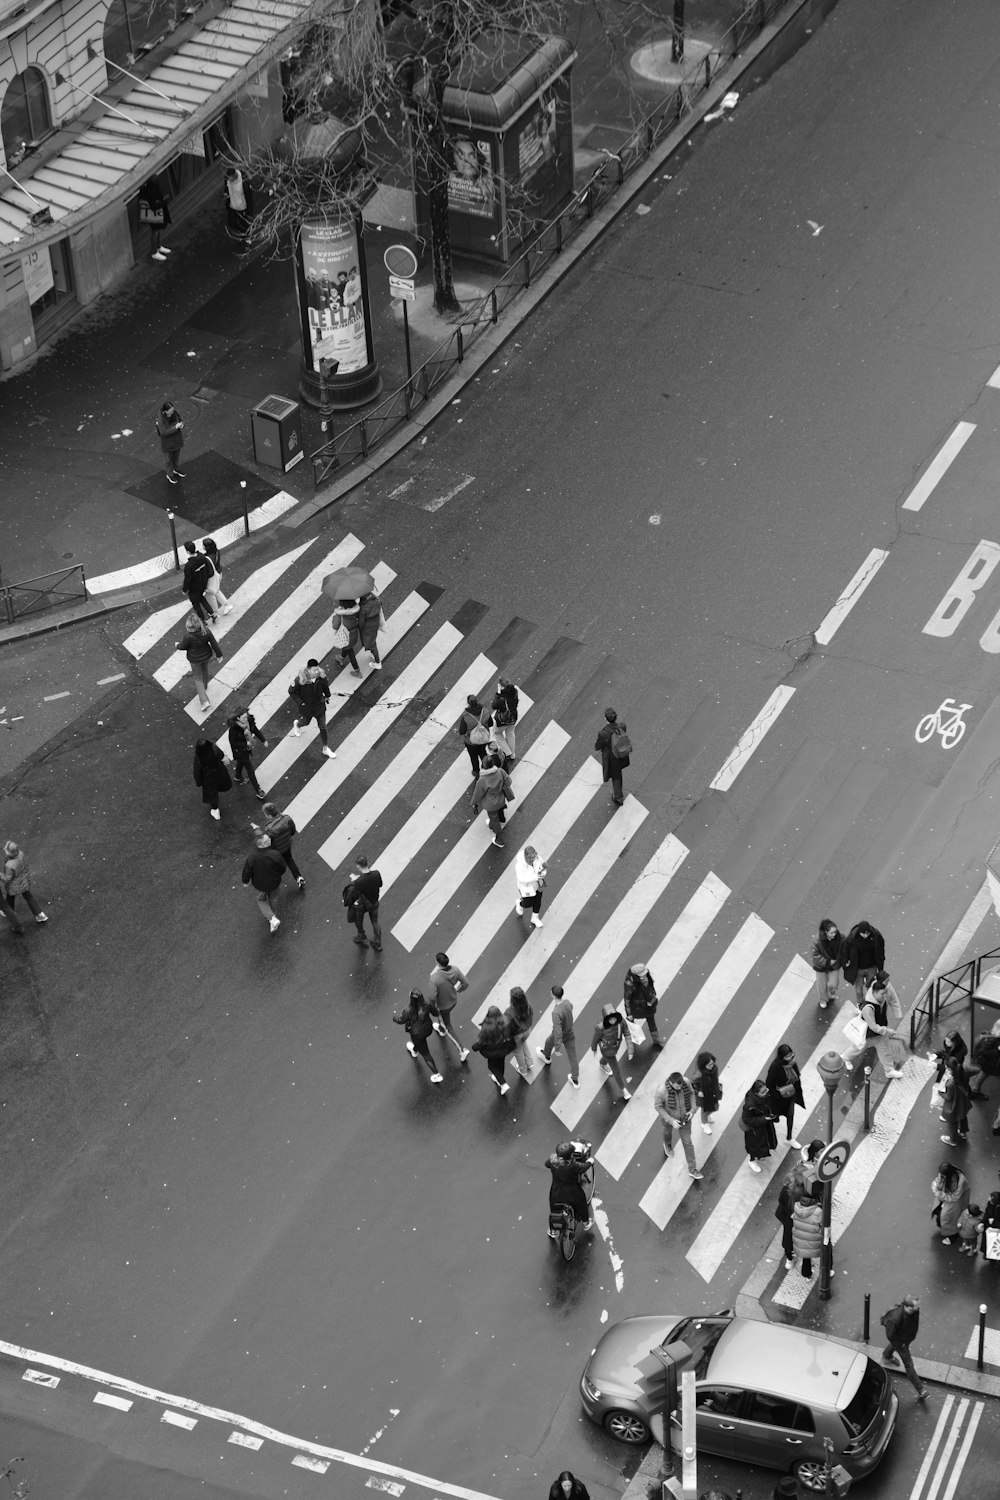 a black and white photo of people crossing the street